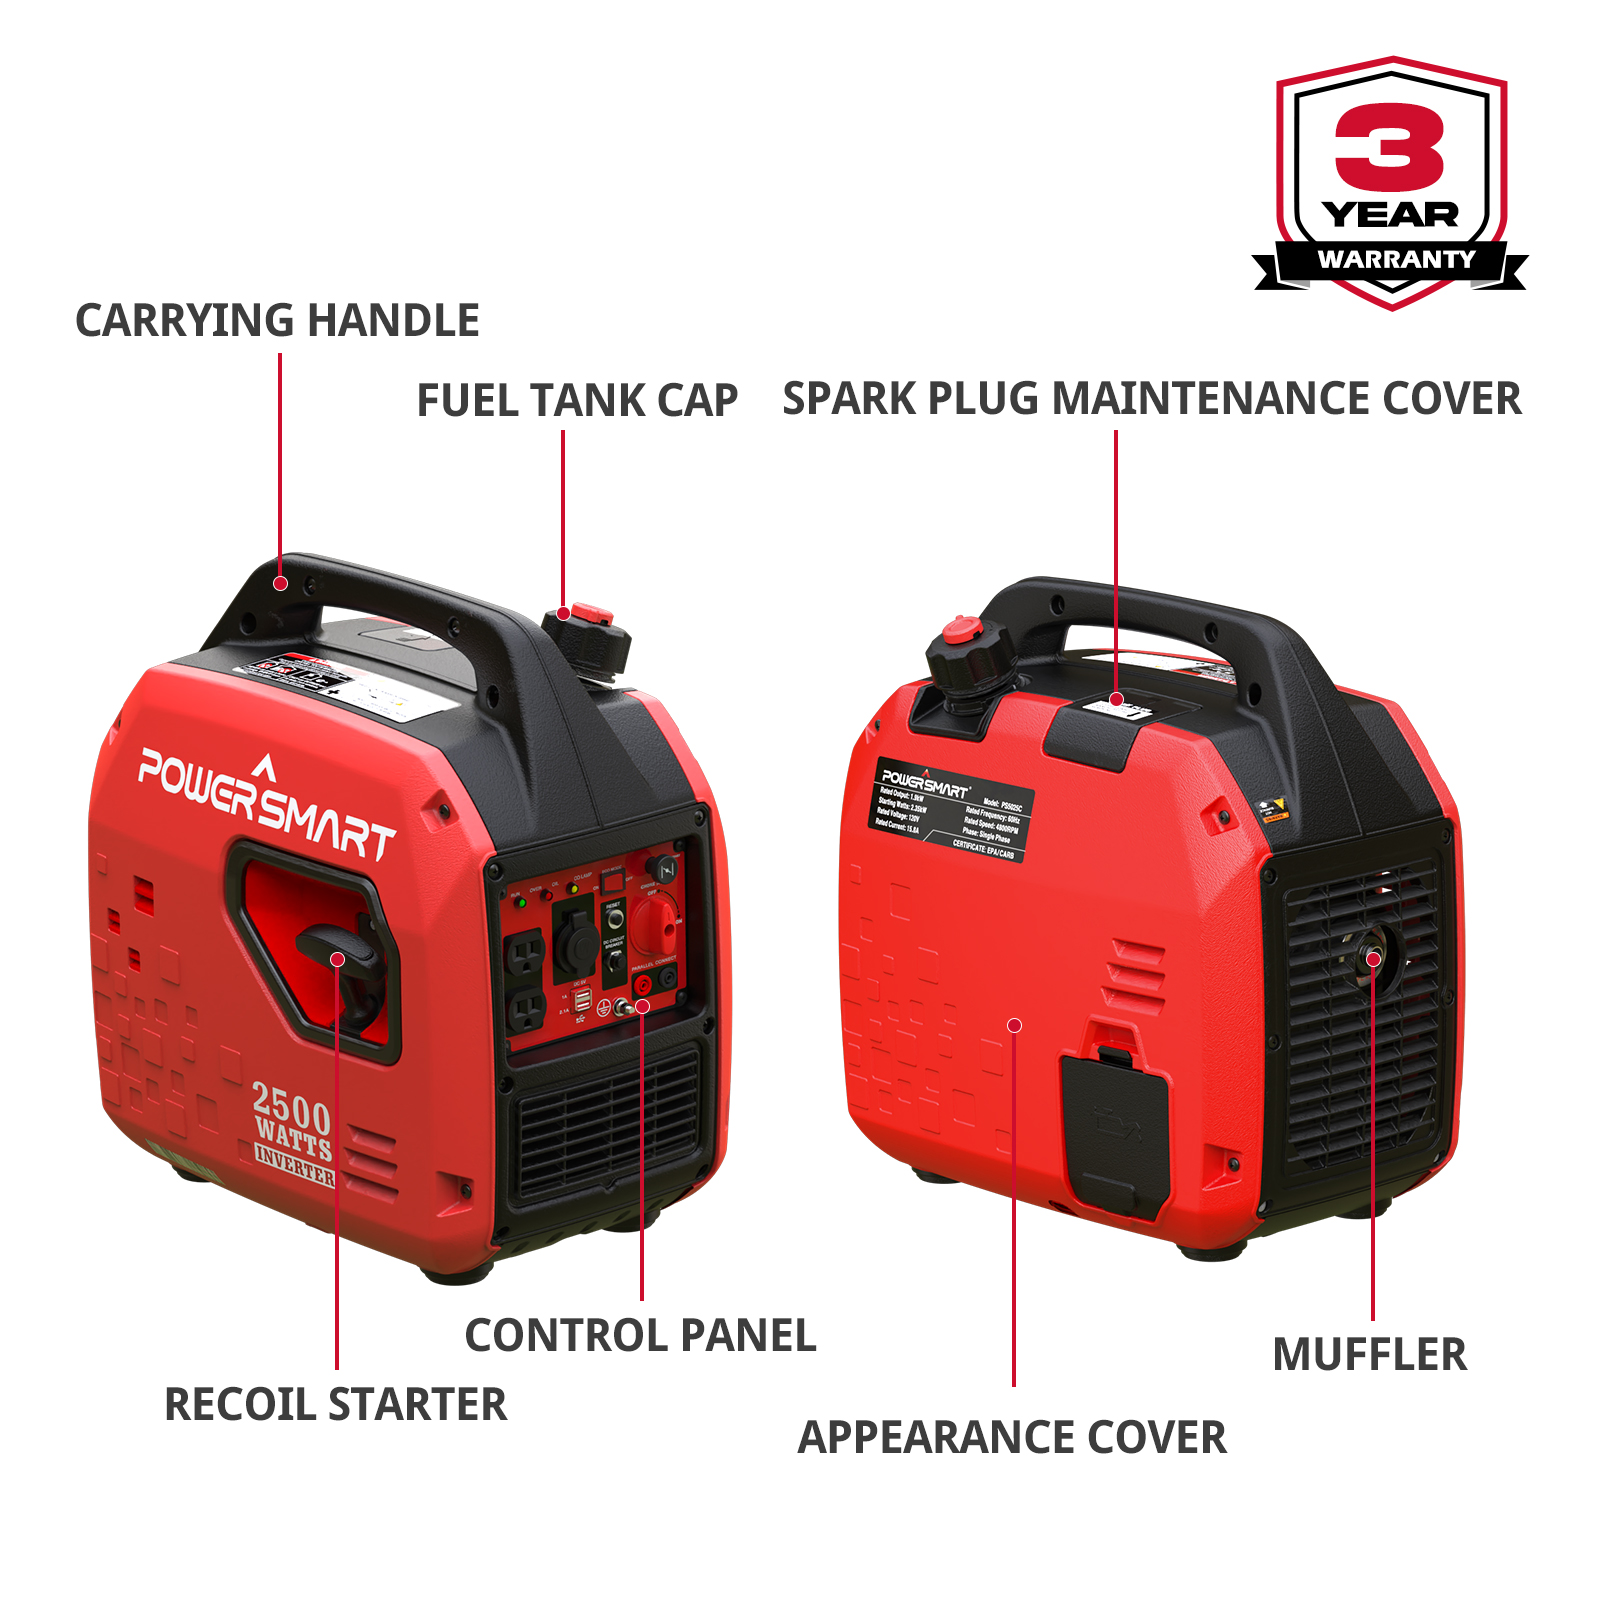 PowerSmart 2500Watt Portable Inverter Gas Powered Generator for Outdoors Camping,Low Noise - image 3 of 6